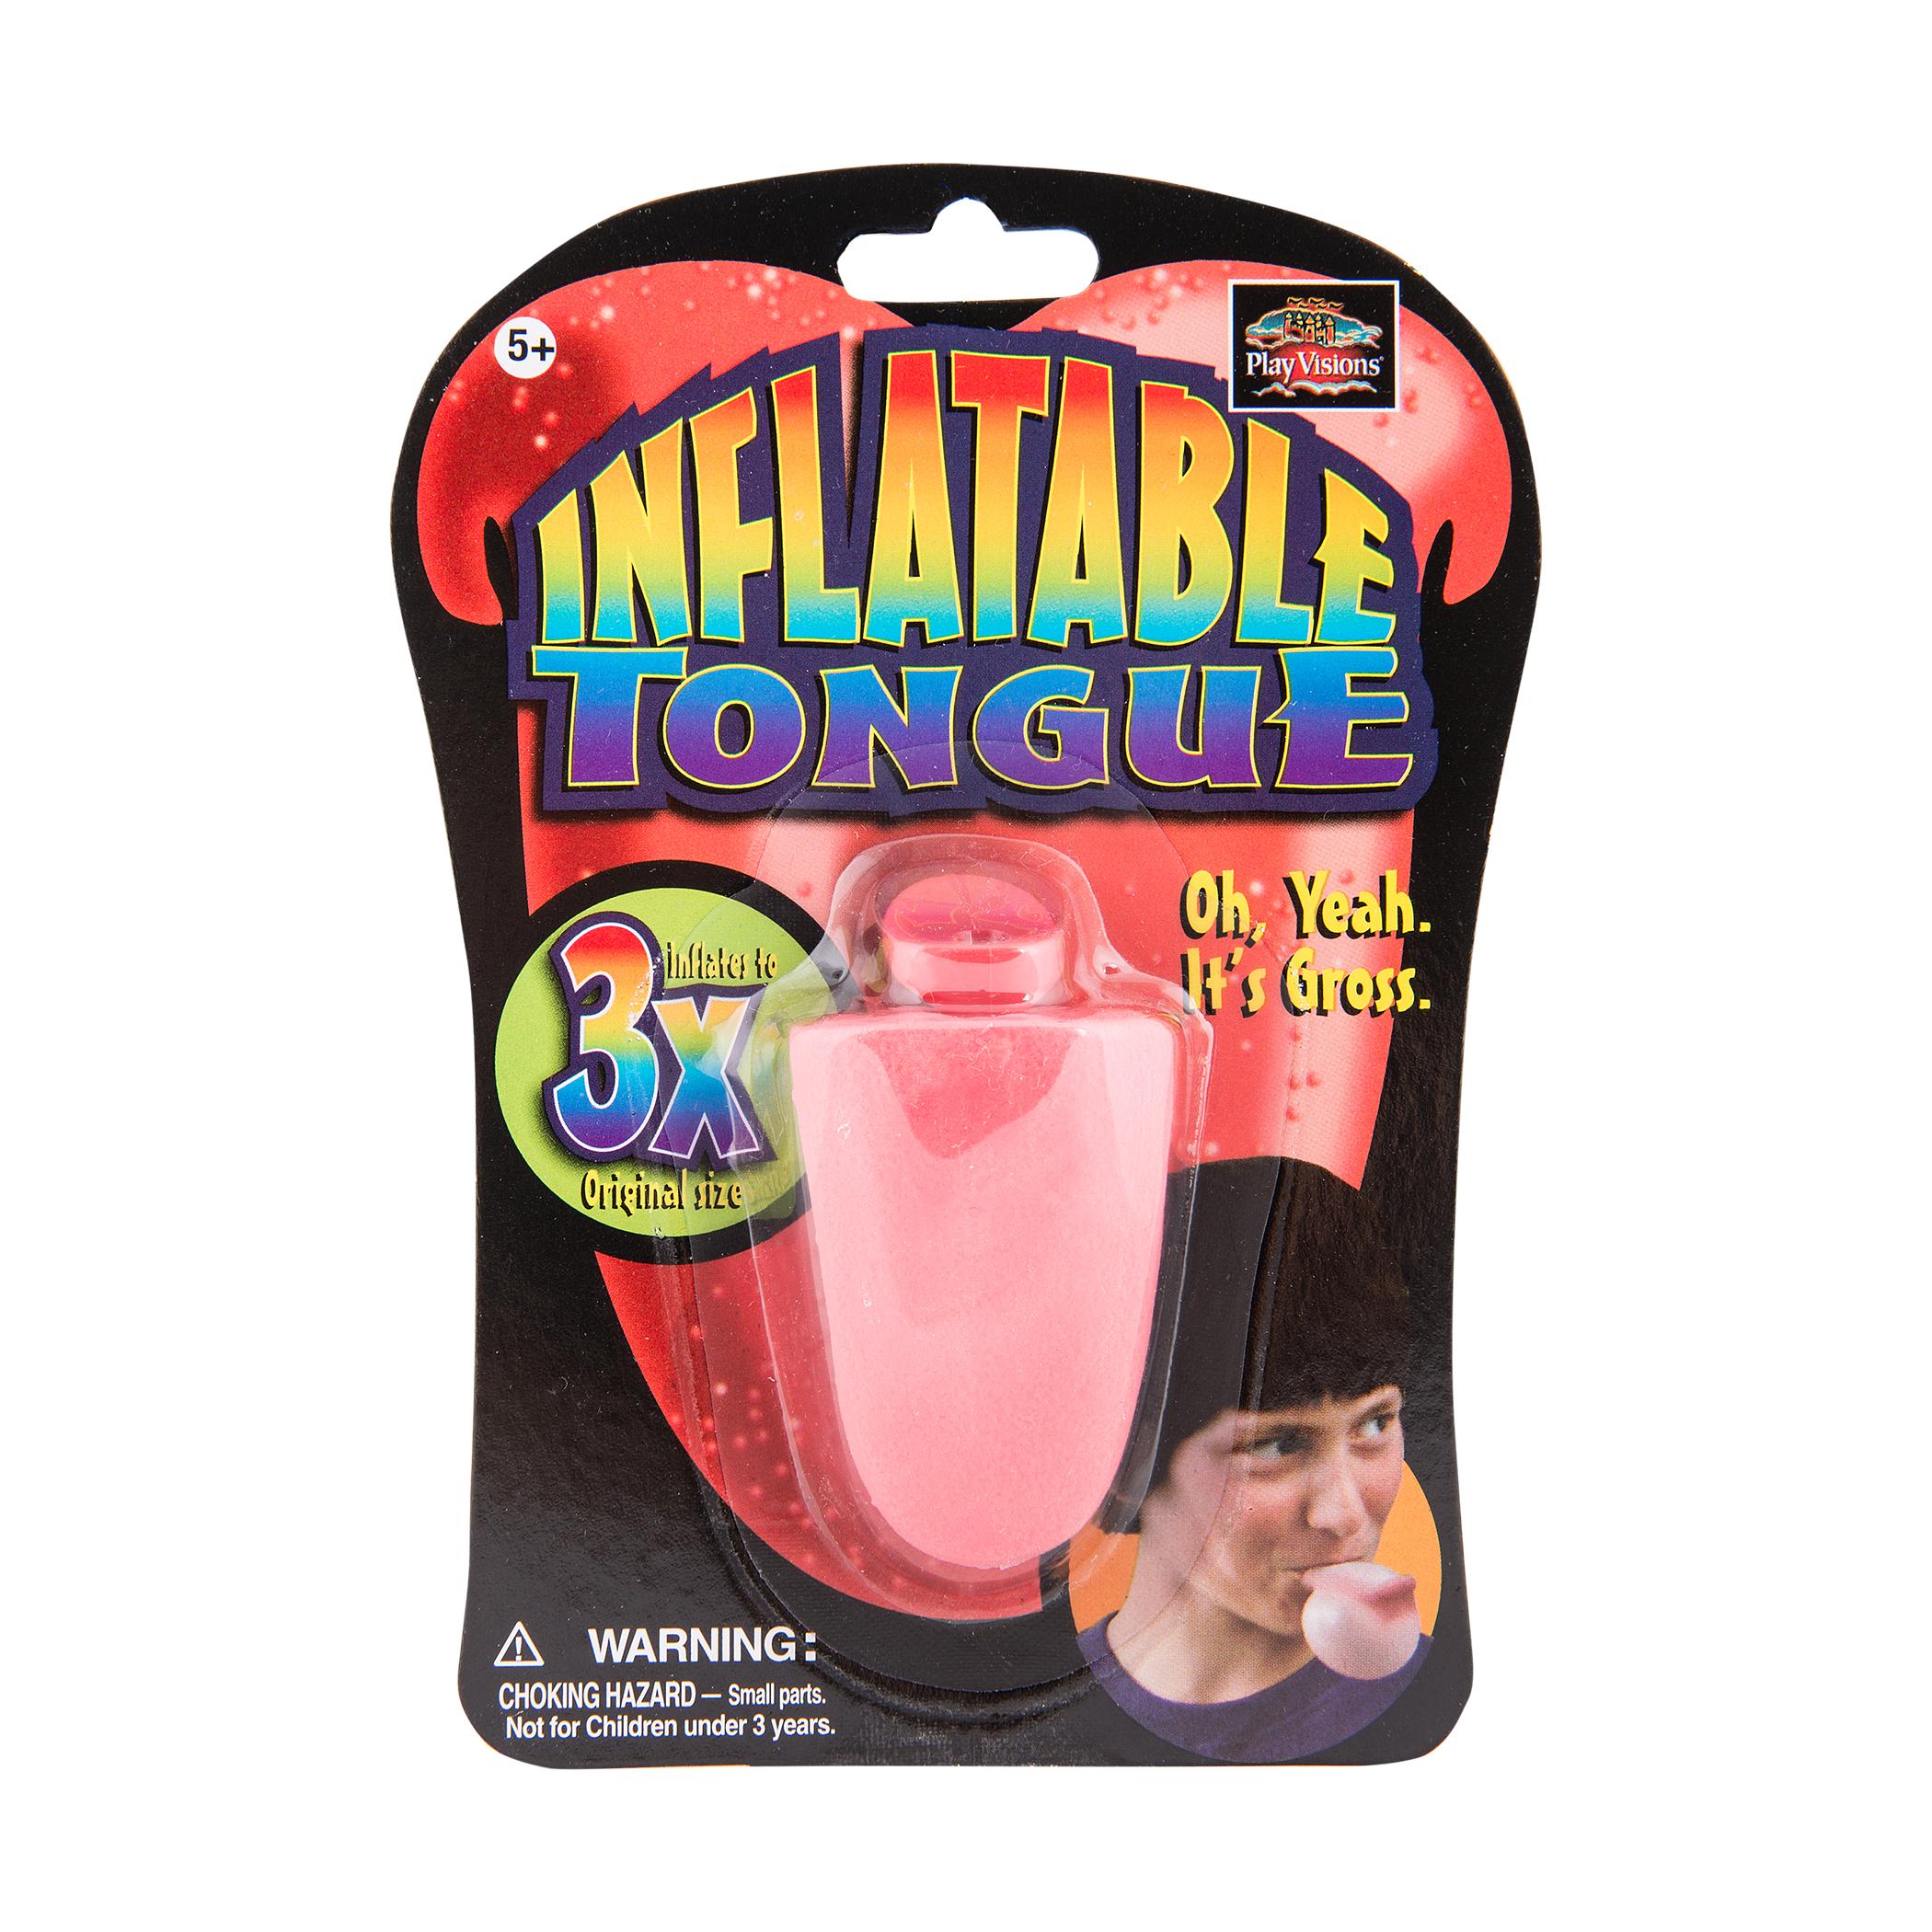  Inflatable Tongue Toy